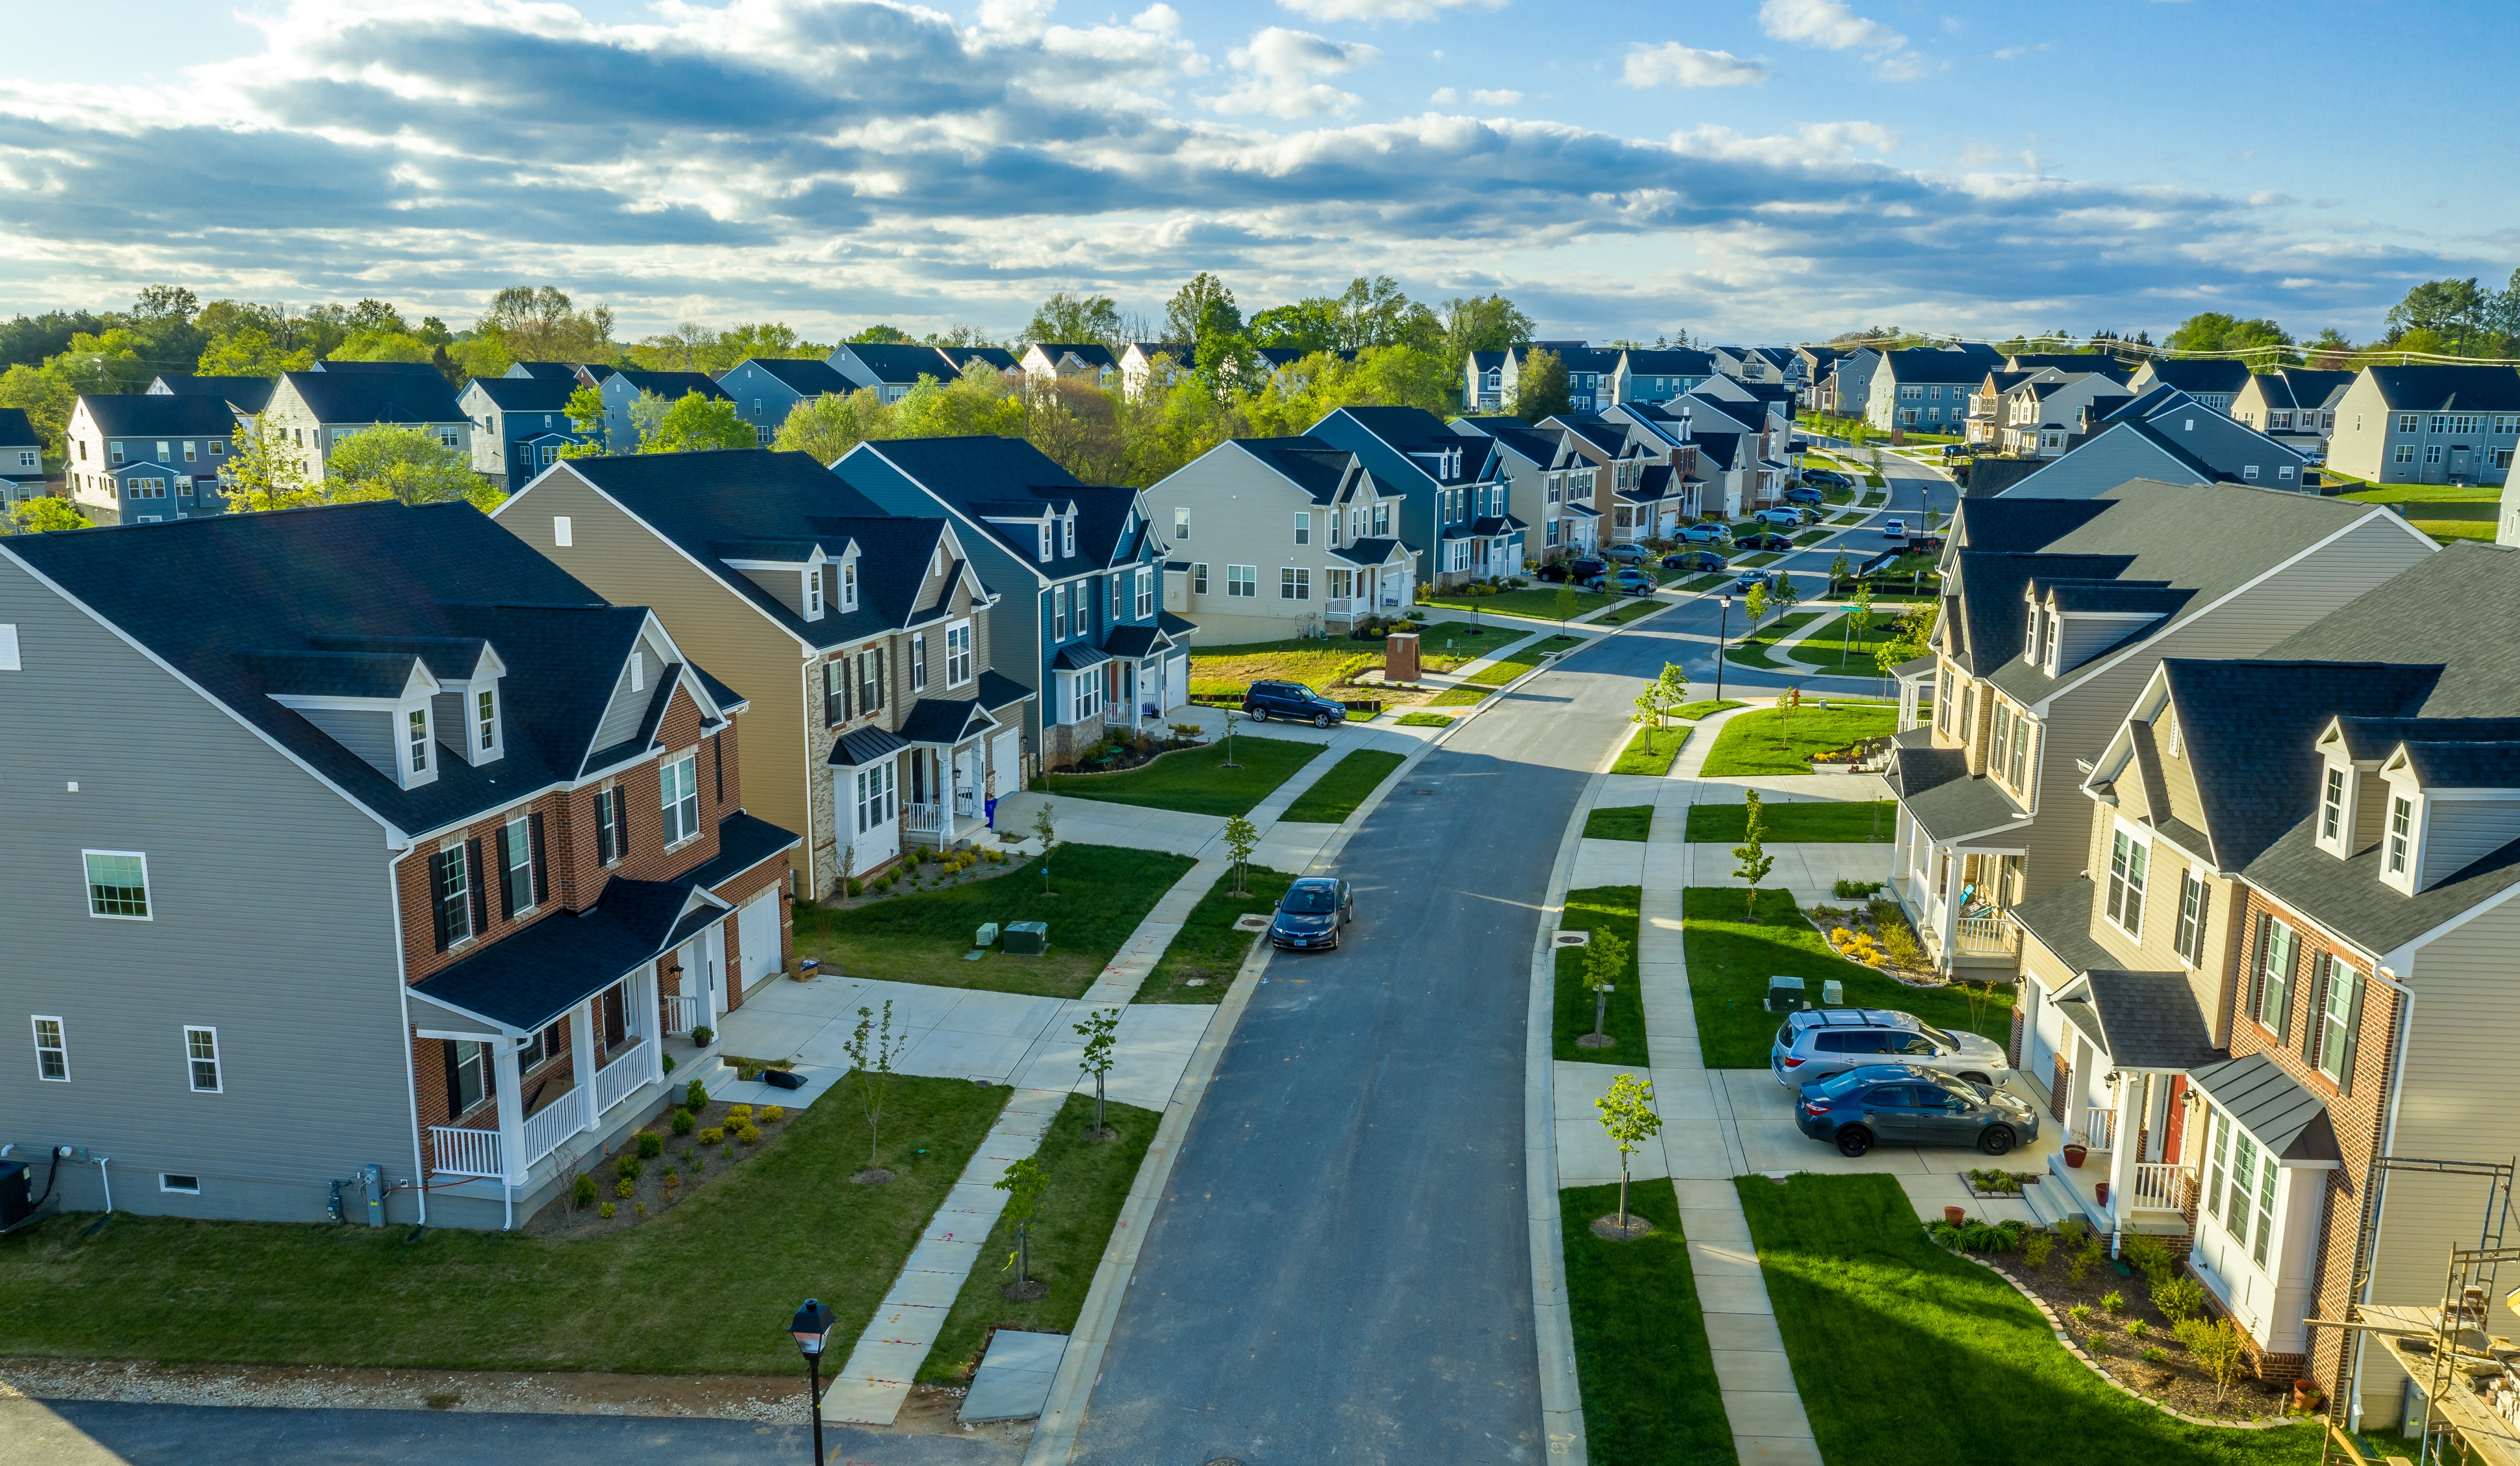 Swiss Investment Firm Acquires 3,500+ U.S. Single-Family Homes For $1 Billion